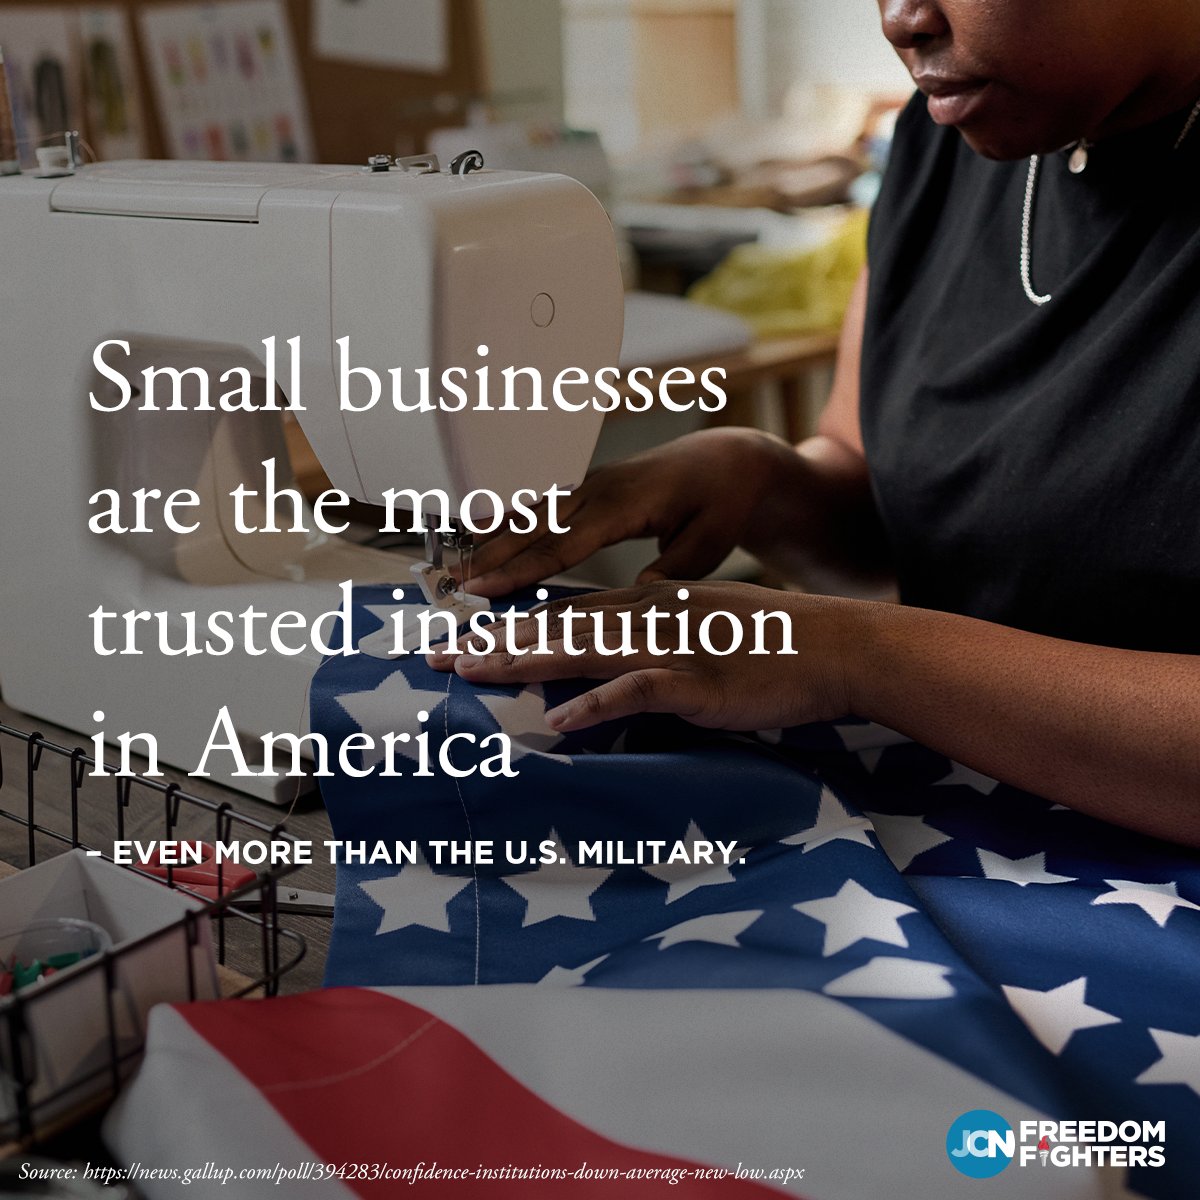 As trust in media and other institutions continues to fall, Americans’ faith in small businesses remains strong. #NationalSmallBusinessWeek